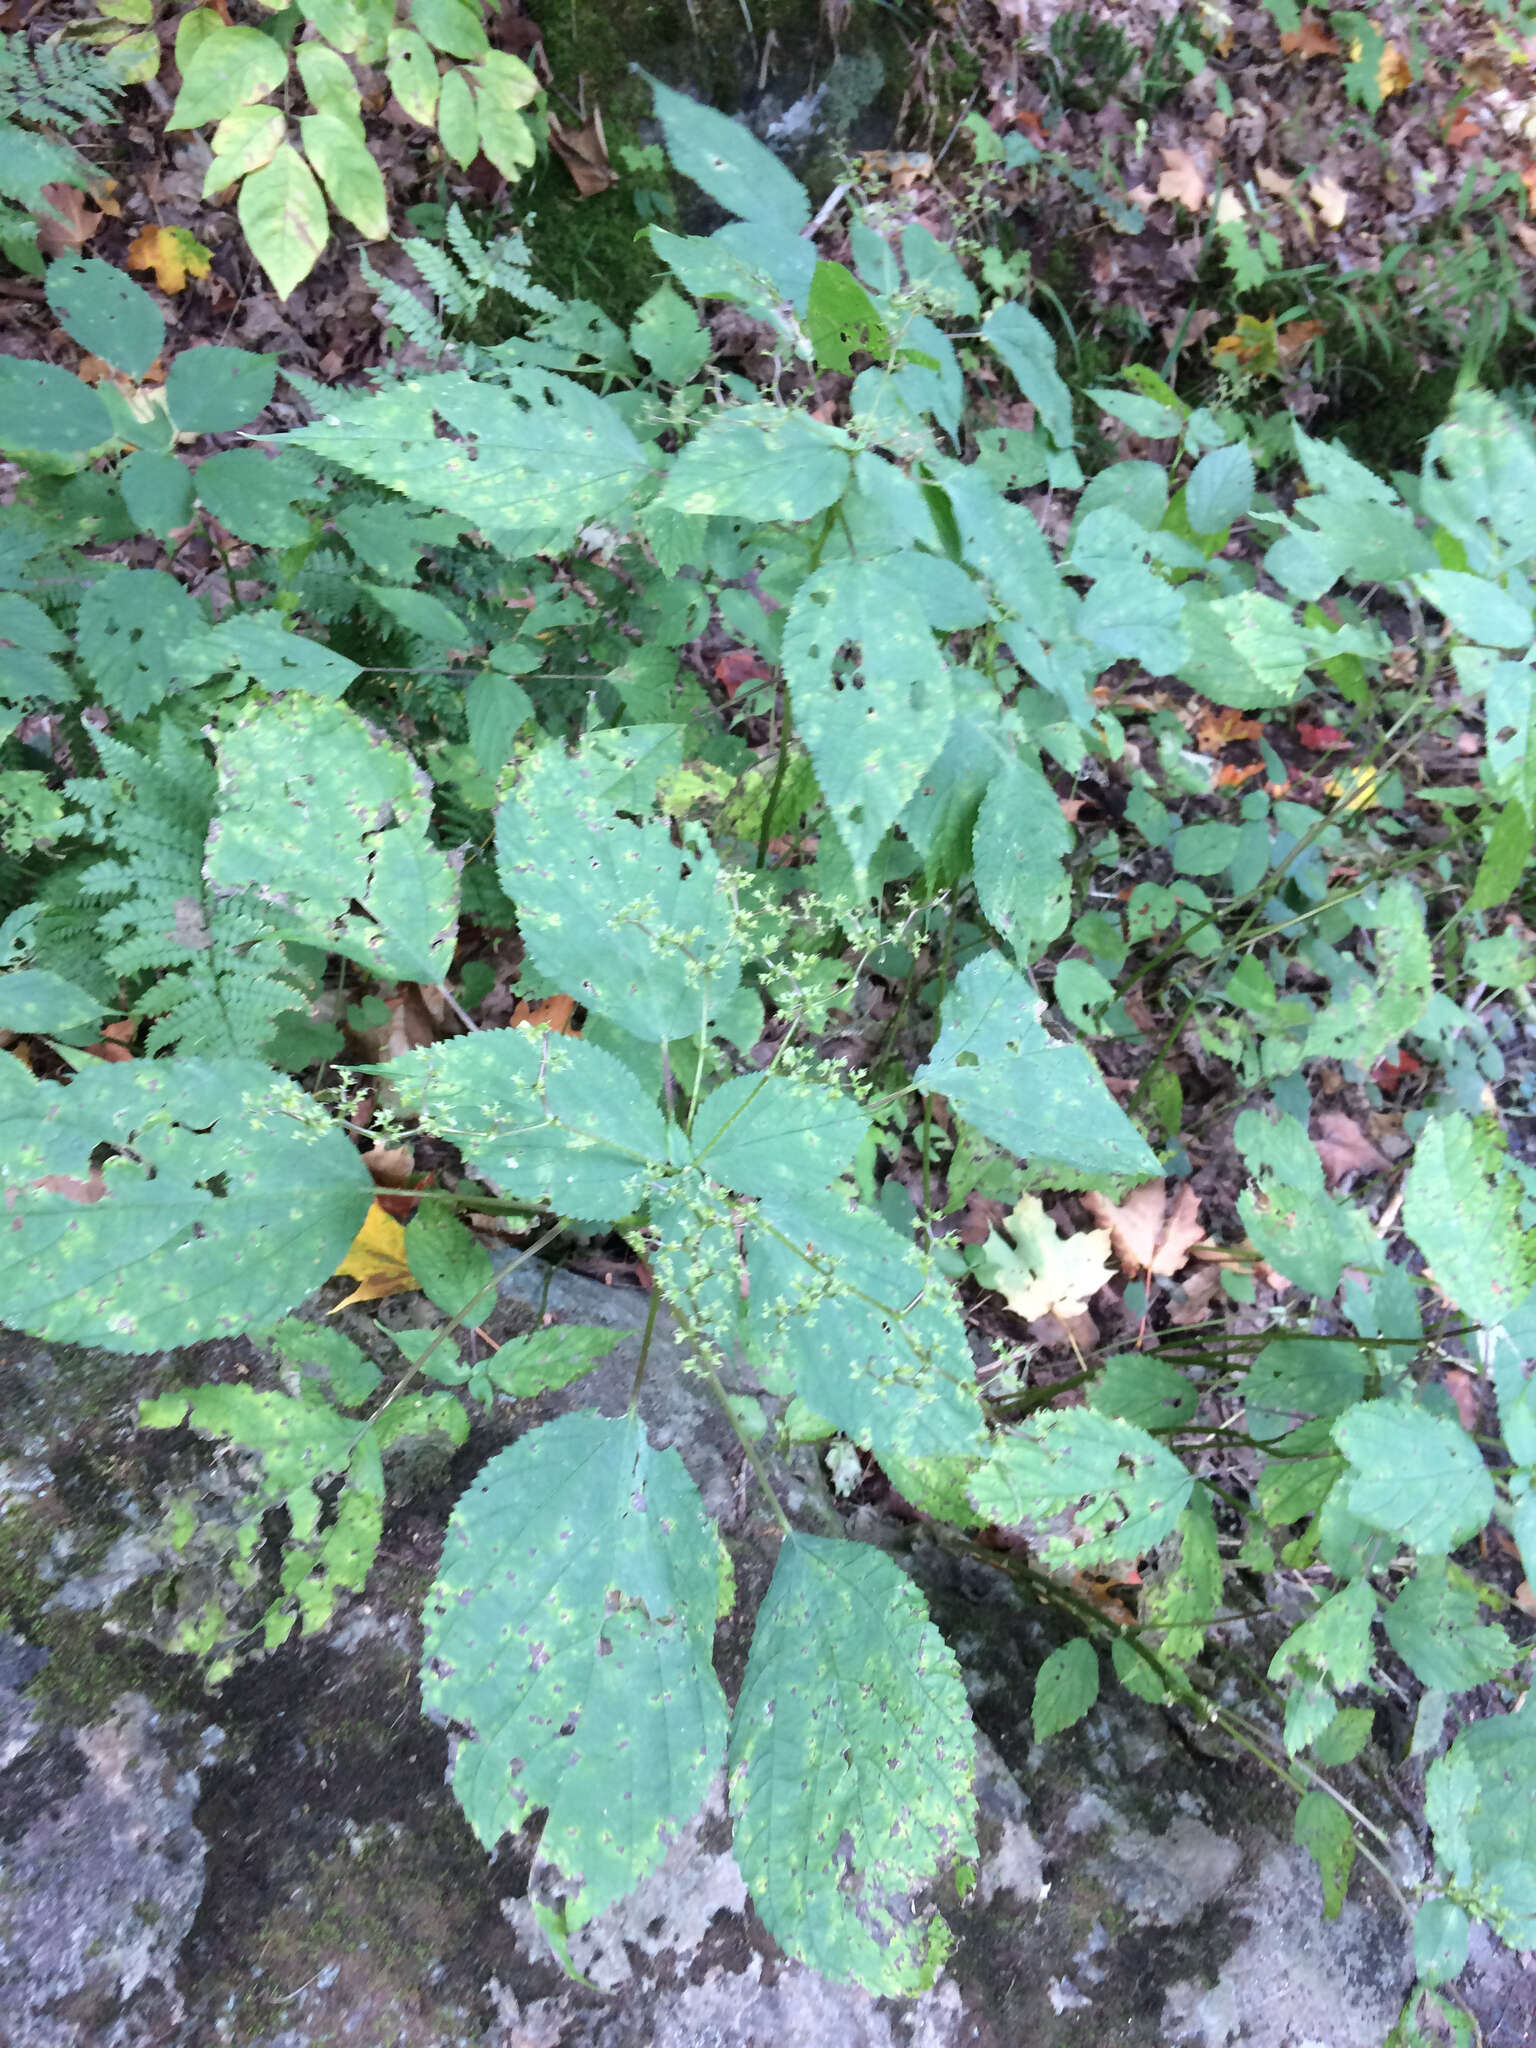 Image of Canadian woodnettle